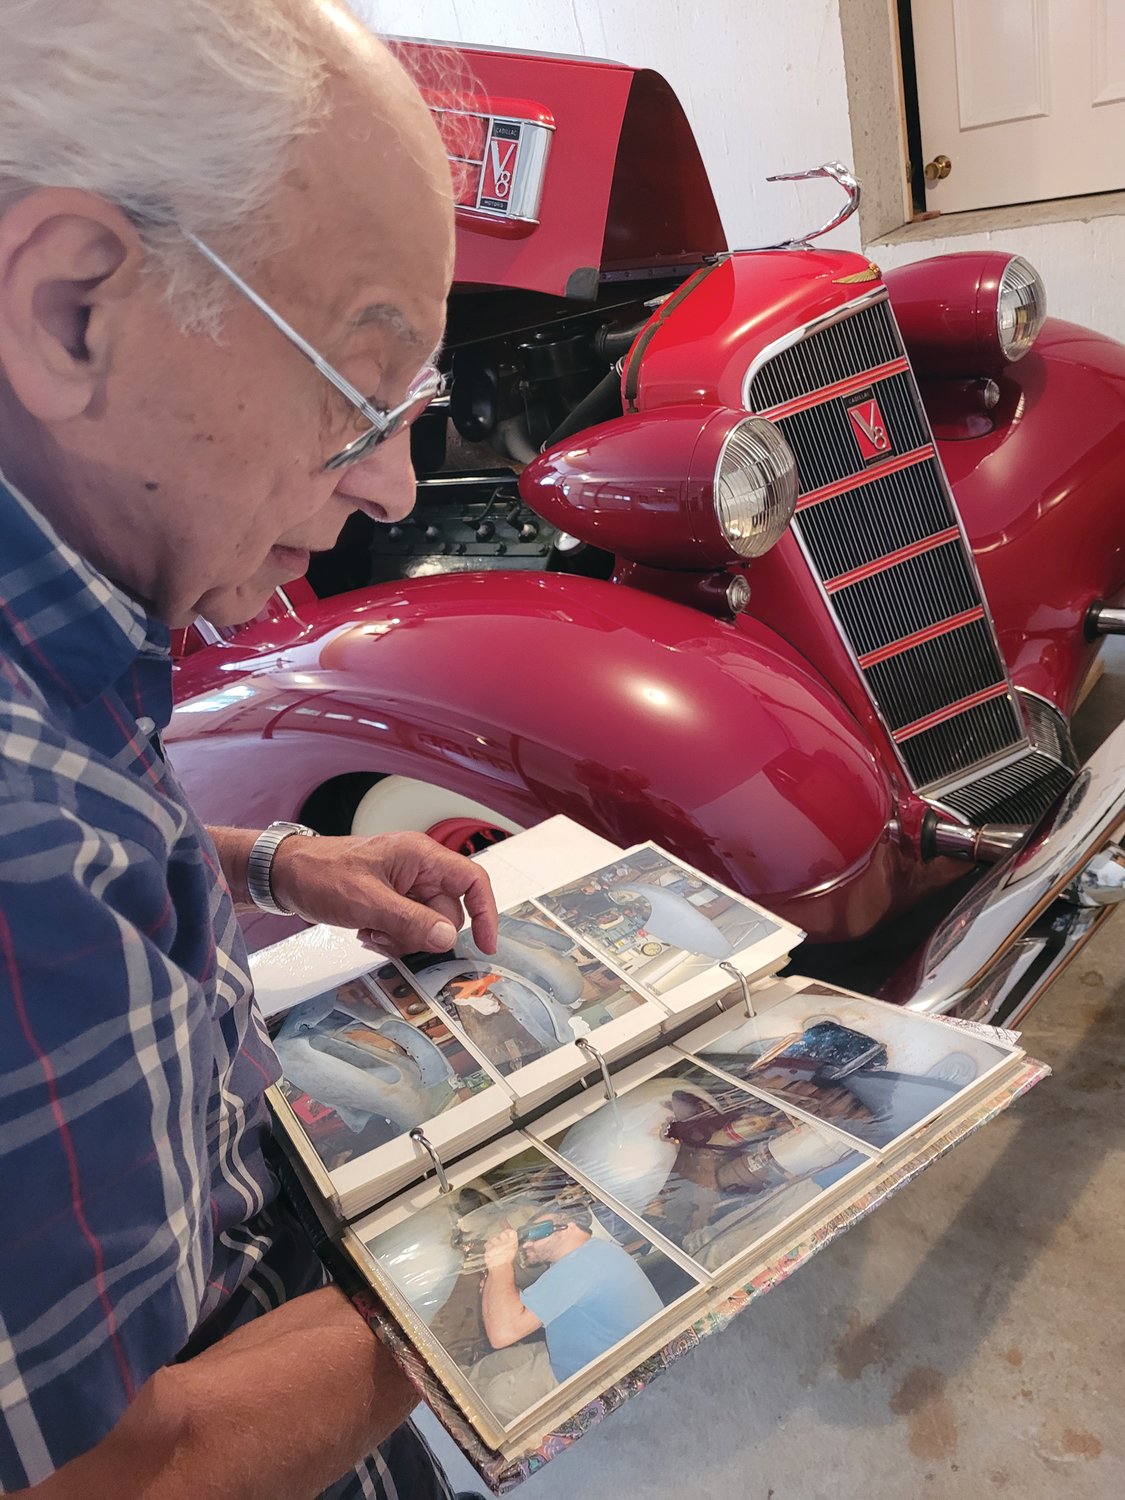 PHOTOGRAPHIC JOURNAL: John Ricci pages through two albums full of snapshots taken during his decades-long restoration.